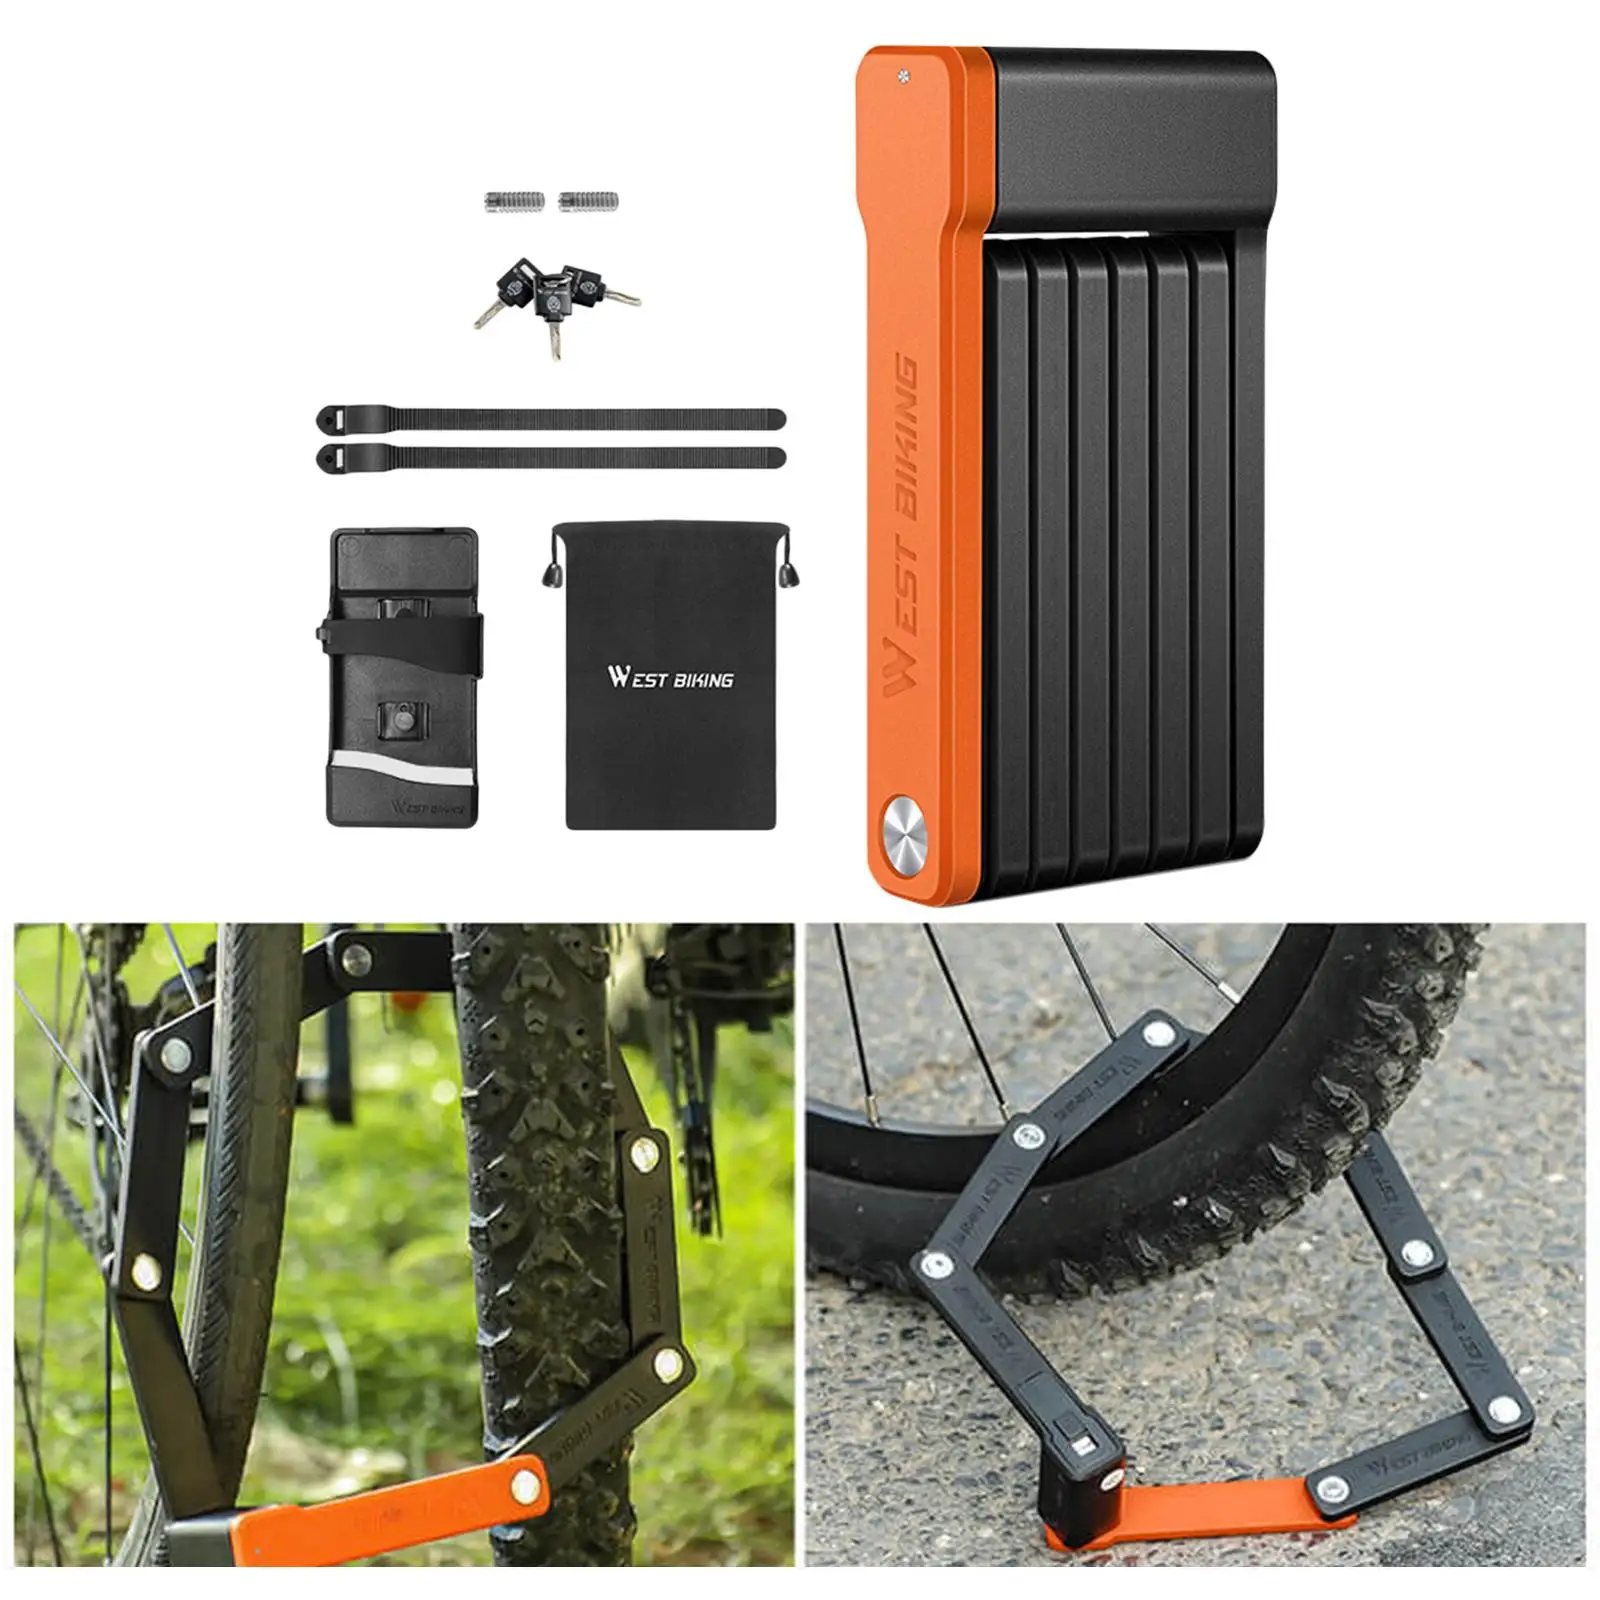 Alloy Folding Combo Bicycle Lock Anti Theft Carrying Case Included with 3 Keys , 63cm Bike Locking Chain for Motorcycle Ebike